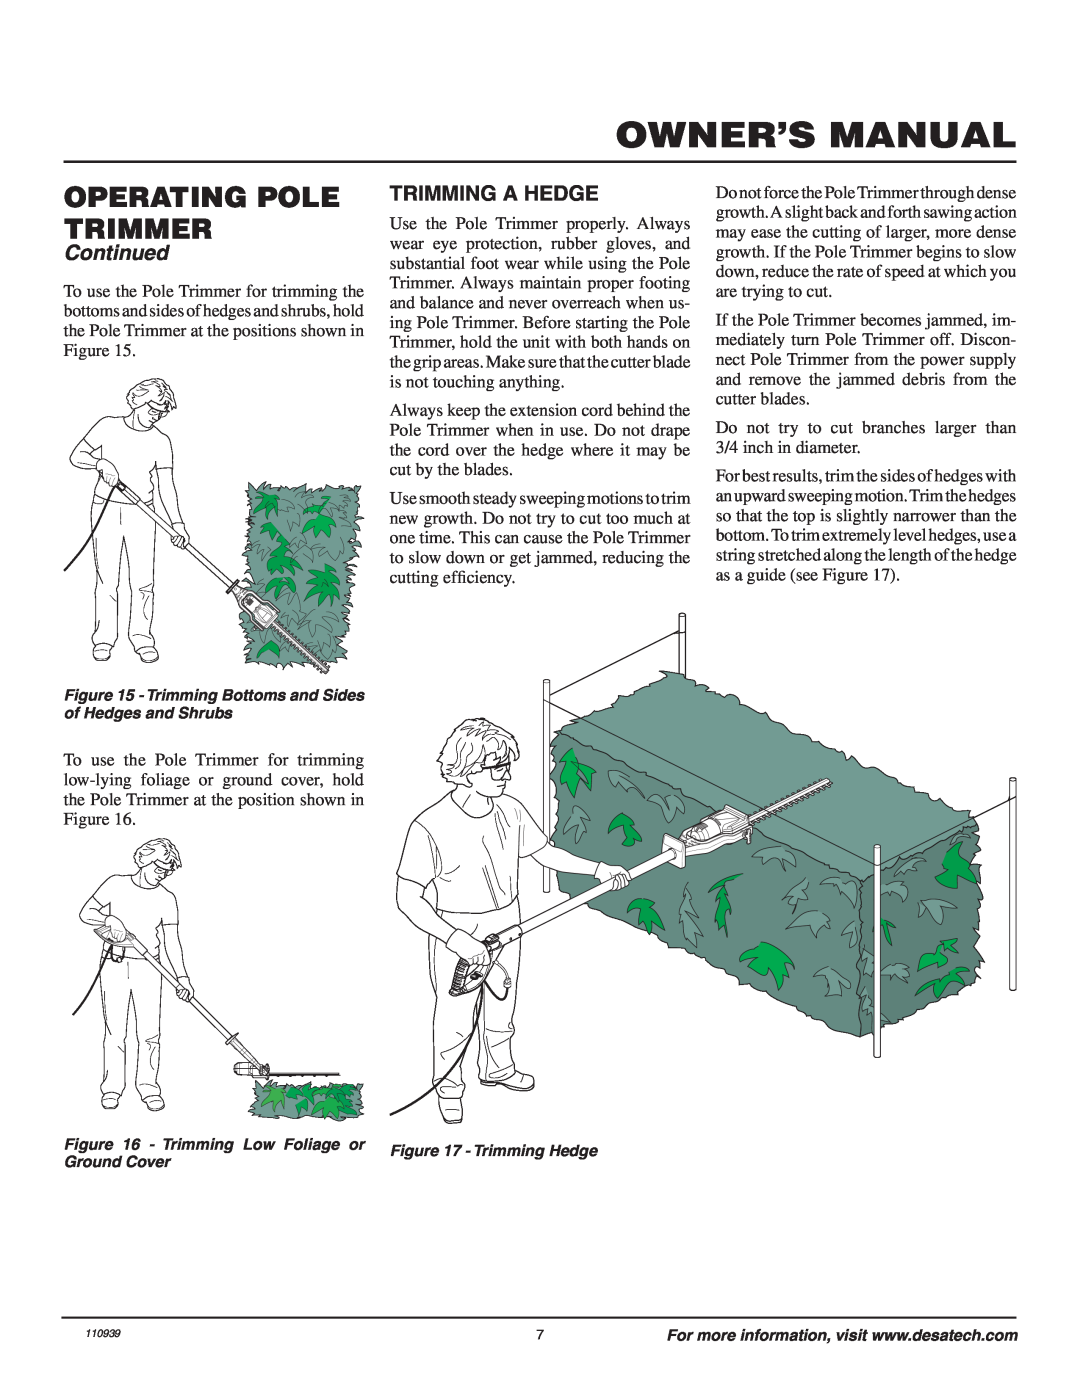 Remington 110946-01A owner manual Trimming A Hedge, Operating Pole Trimmer, Continued 